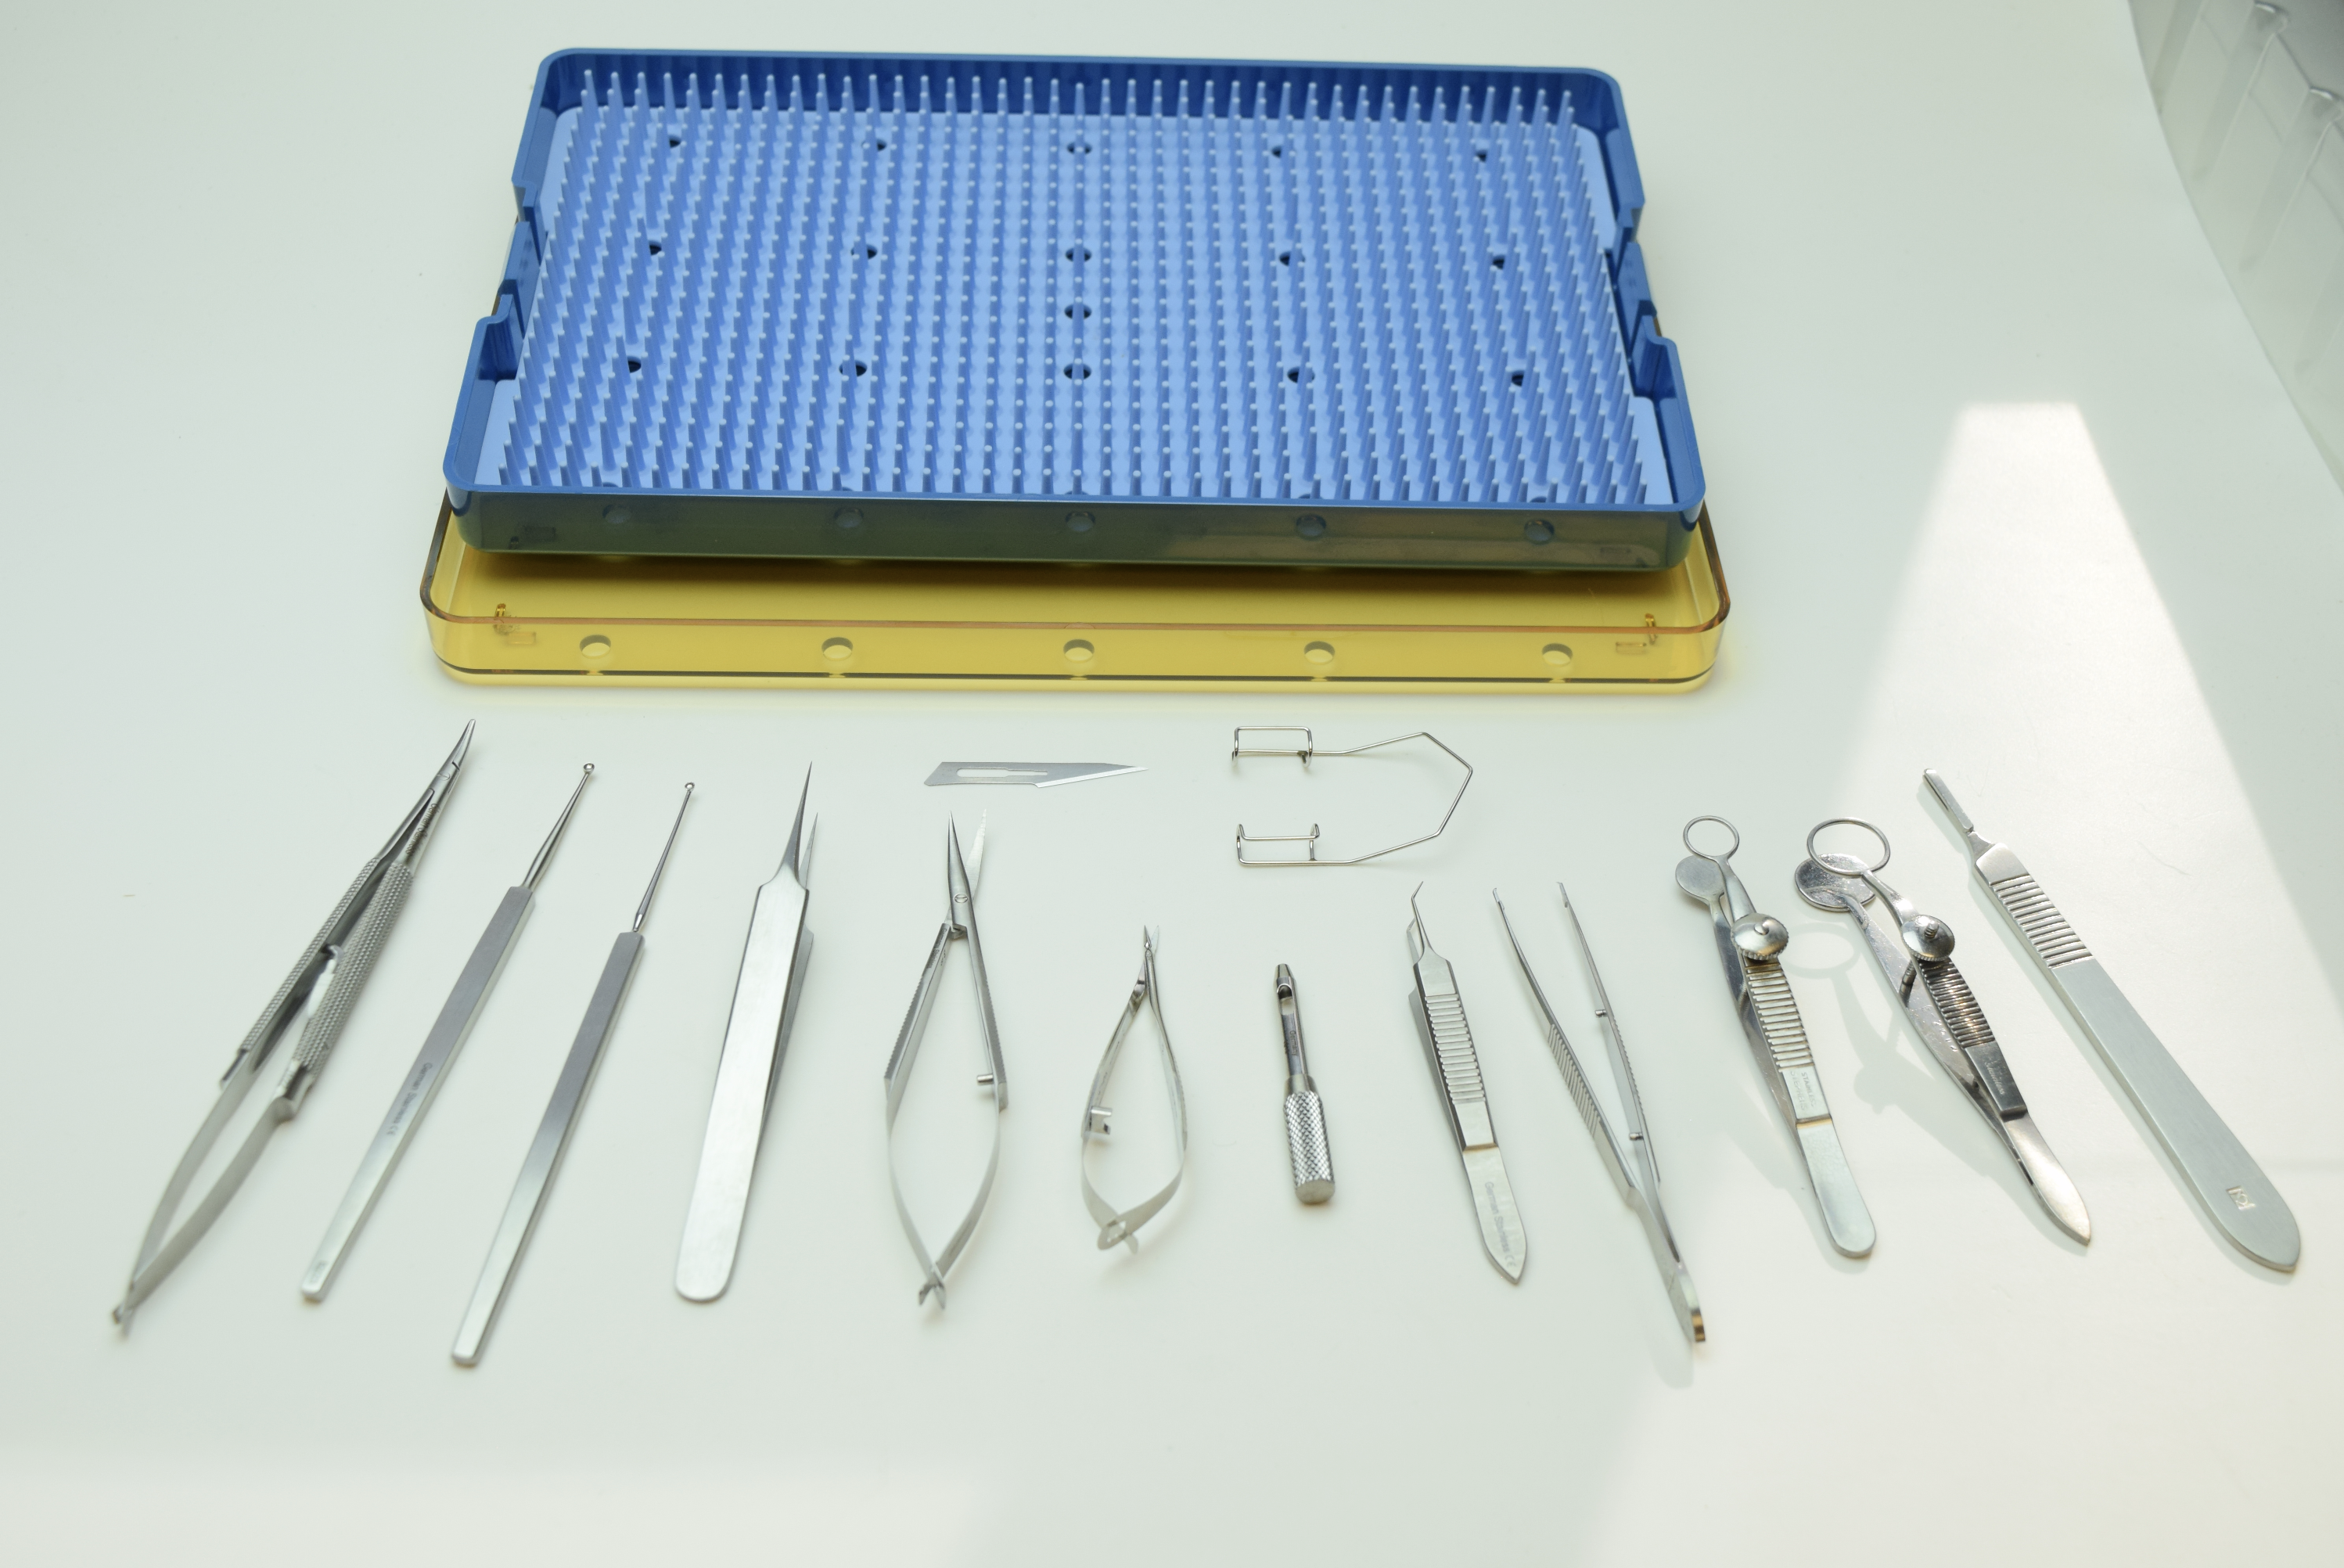 Fig. 4. Example of an in-office surgical instrument set that has all the recommended tools needed to successfully perform simple procedures (scissors, scalpels, forceps). This may be a wise investment for ODs who are just beginning the process of equipping their practice for these services.